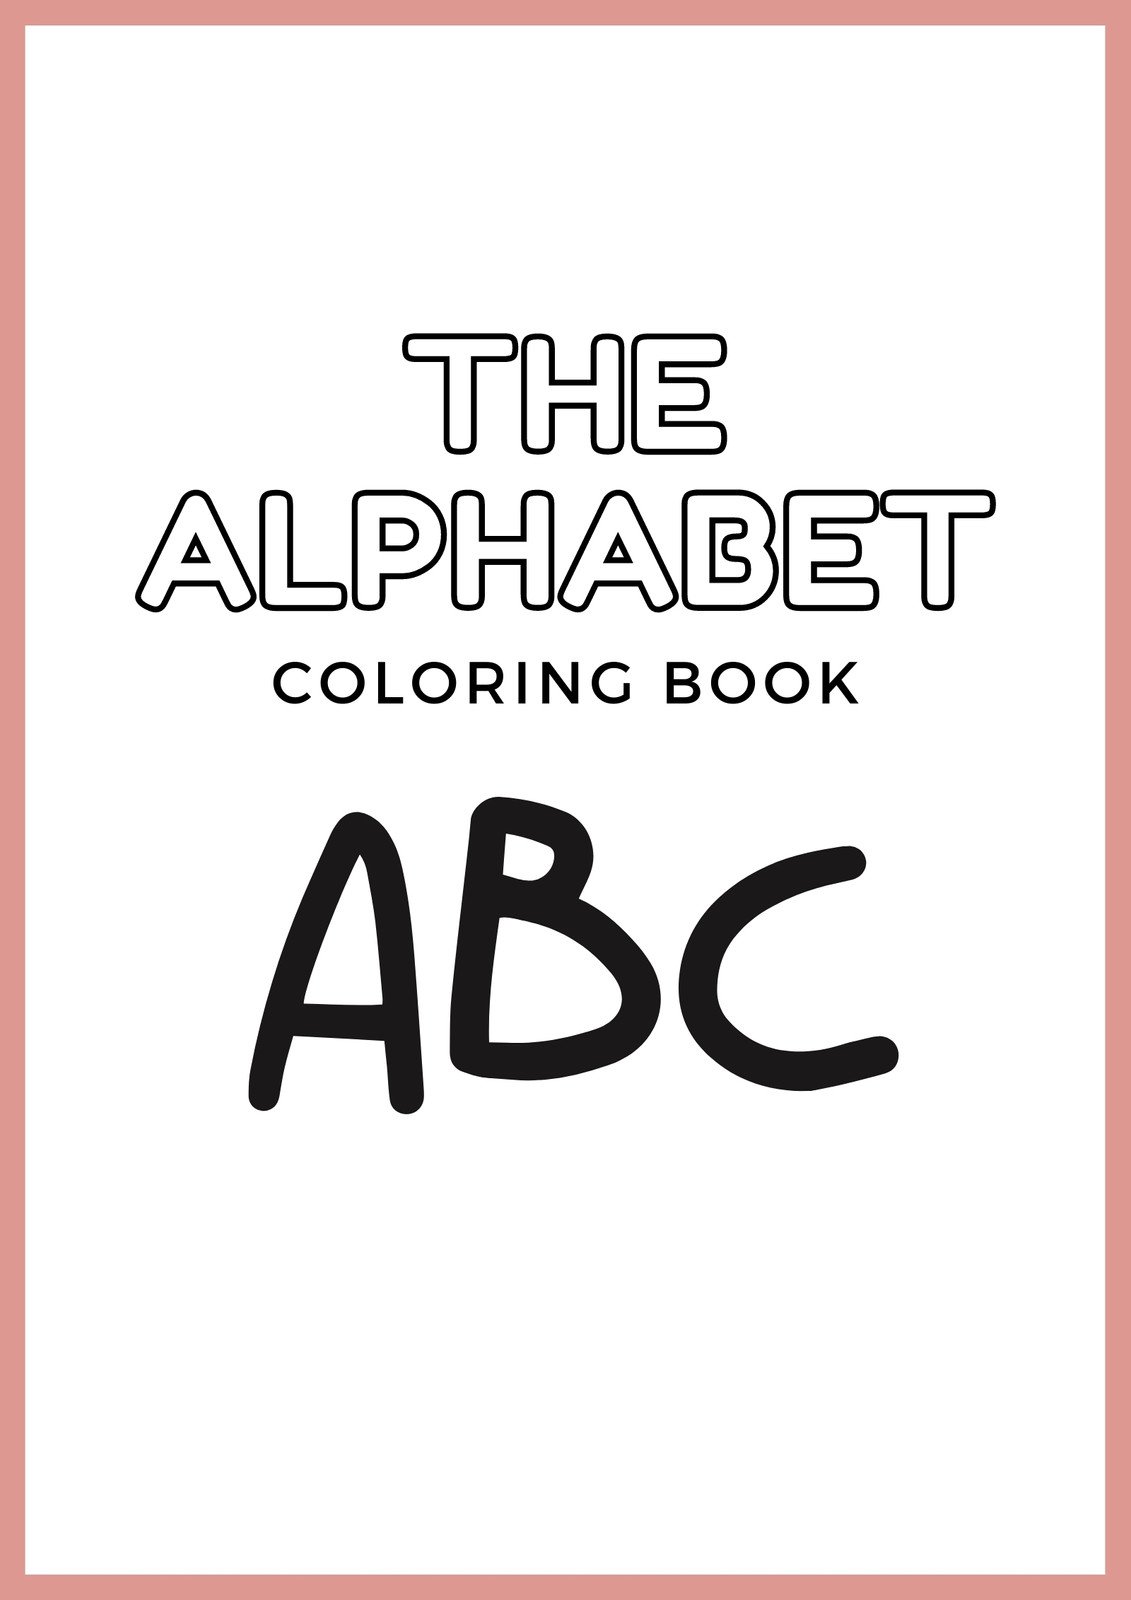 Free Alphabet Printables – Letters, Worksheets, Stencils & ABC Flash Cards  - What Mommy Does